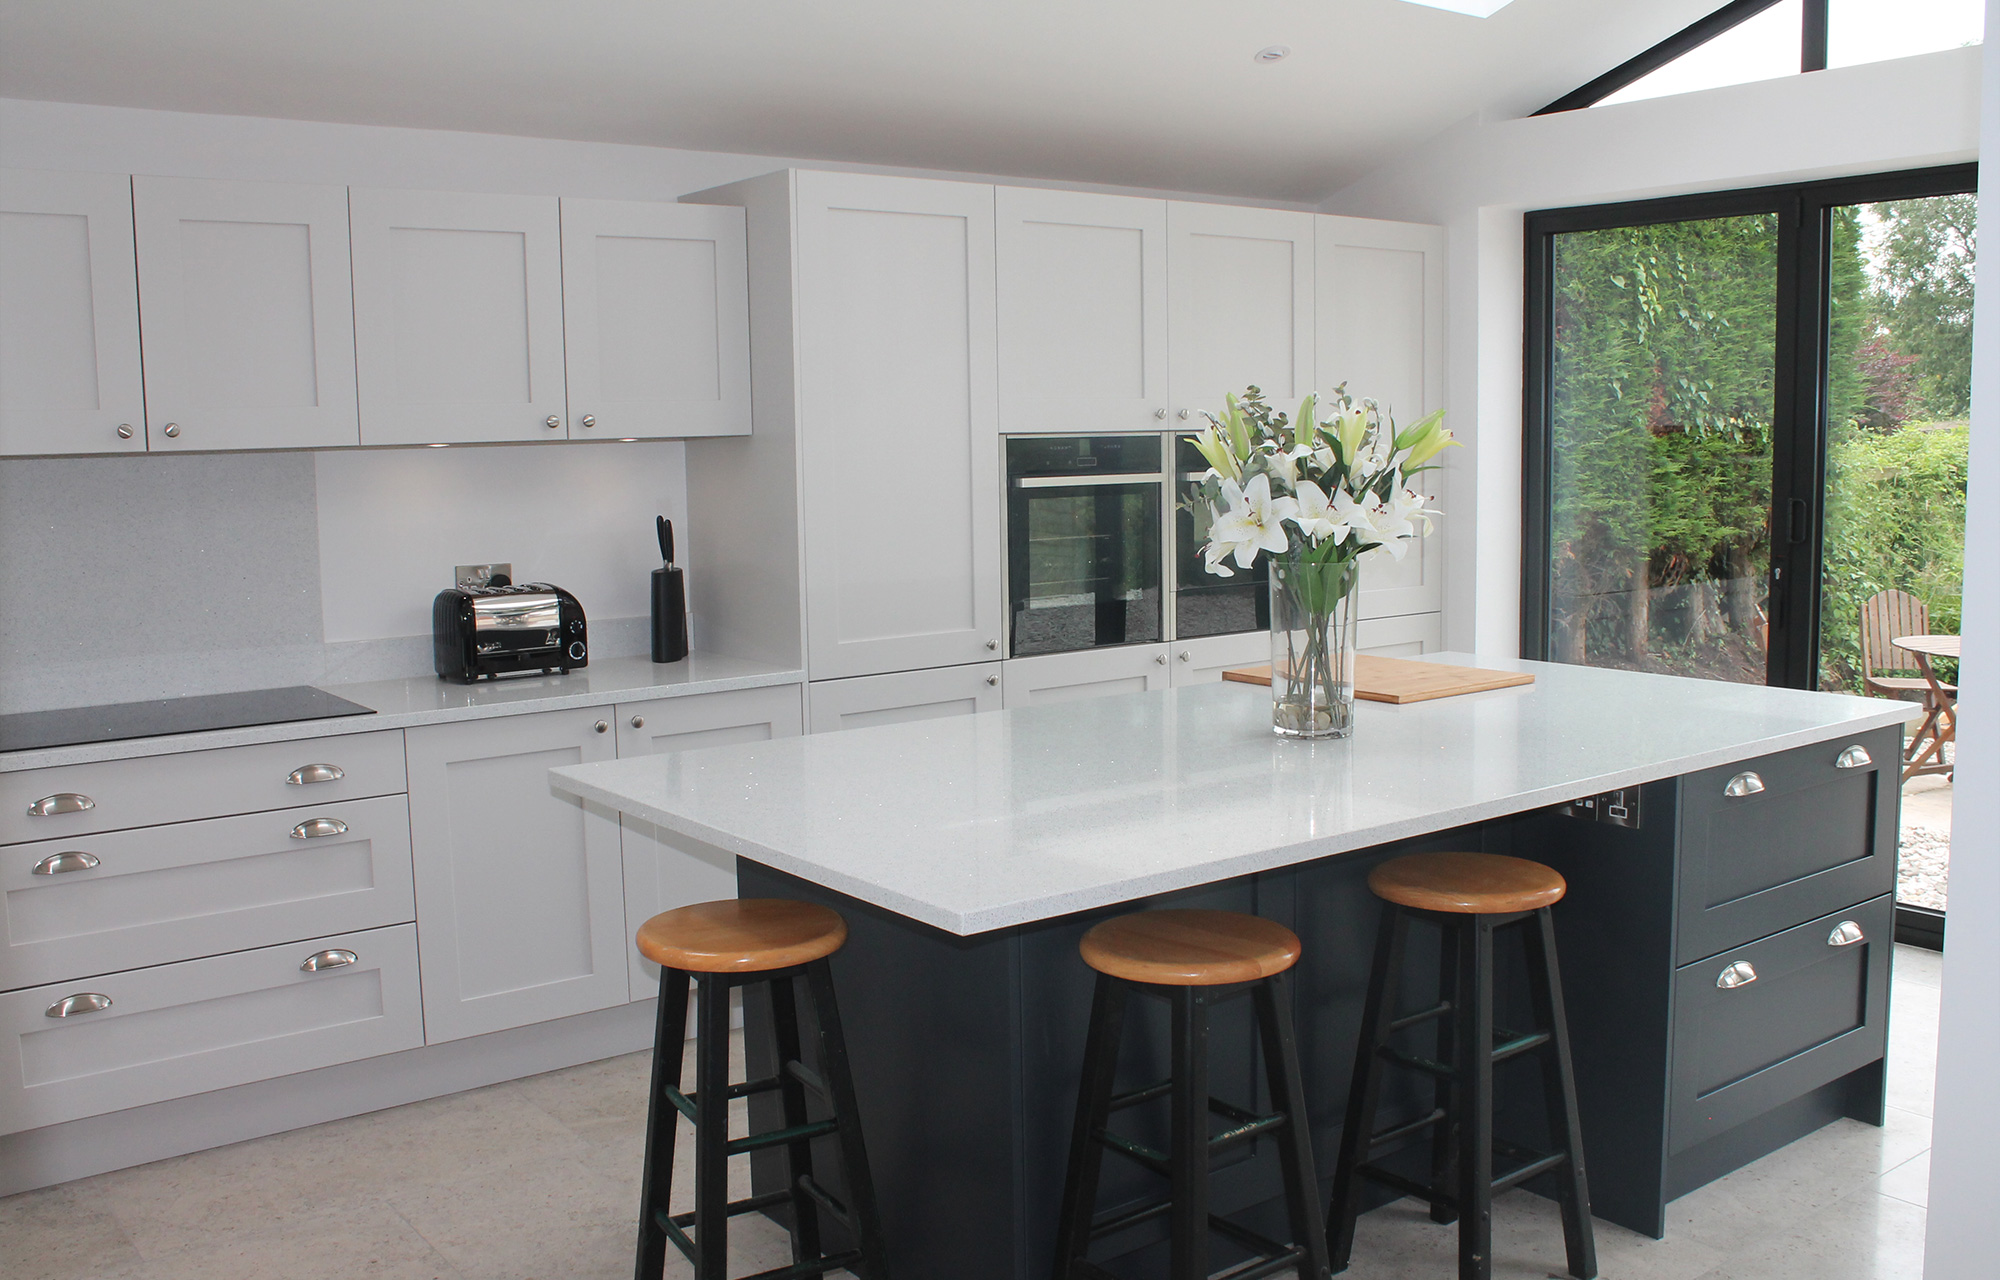 Bespoke painted Shaker kitchen and boot room